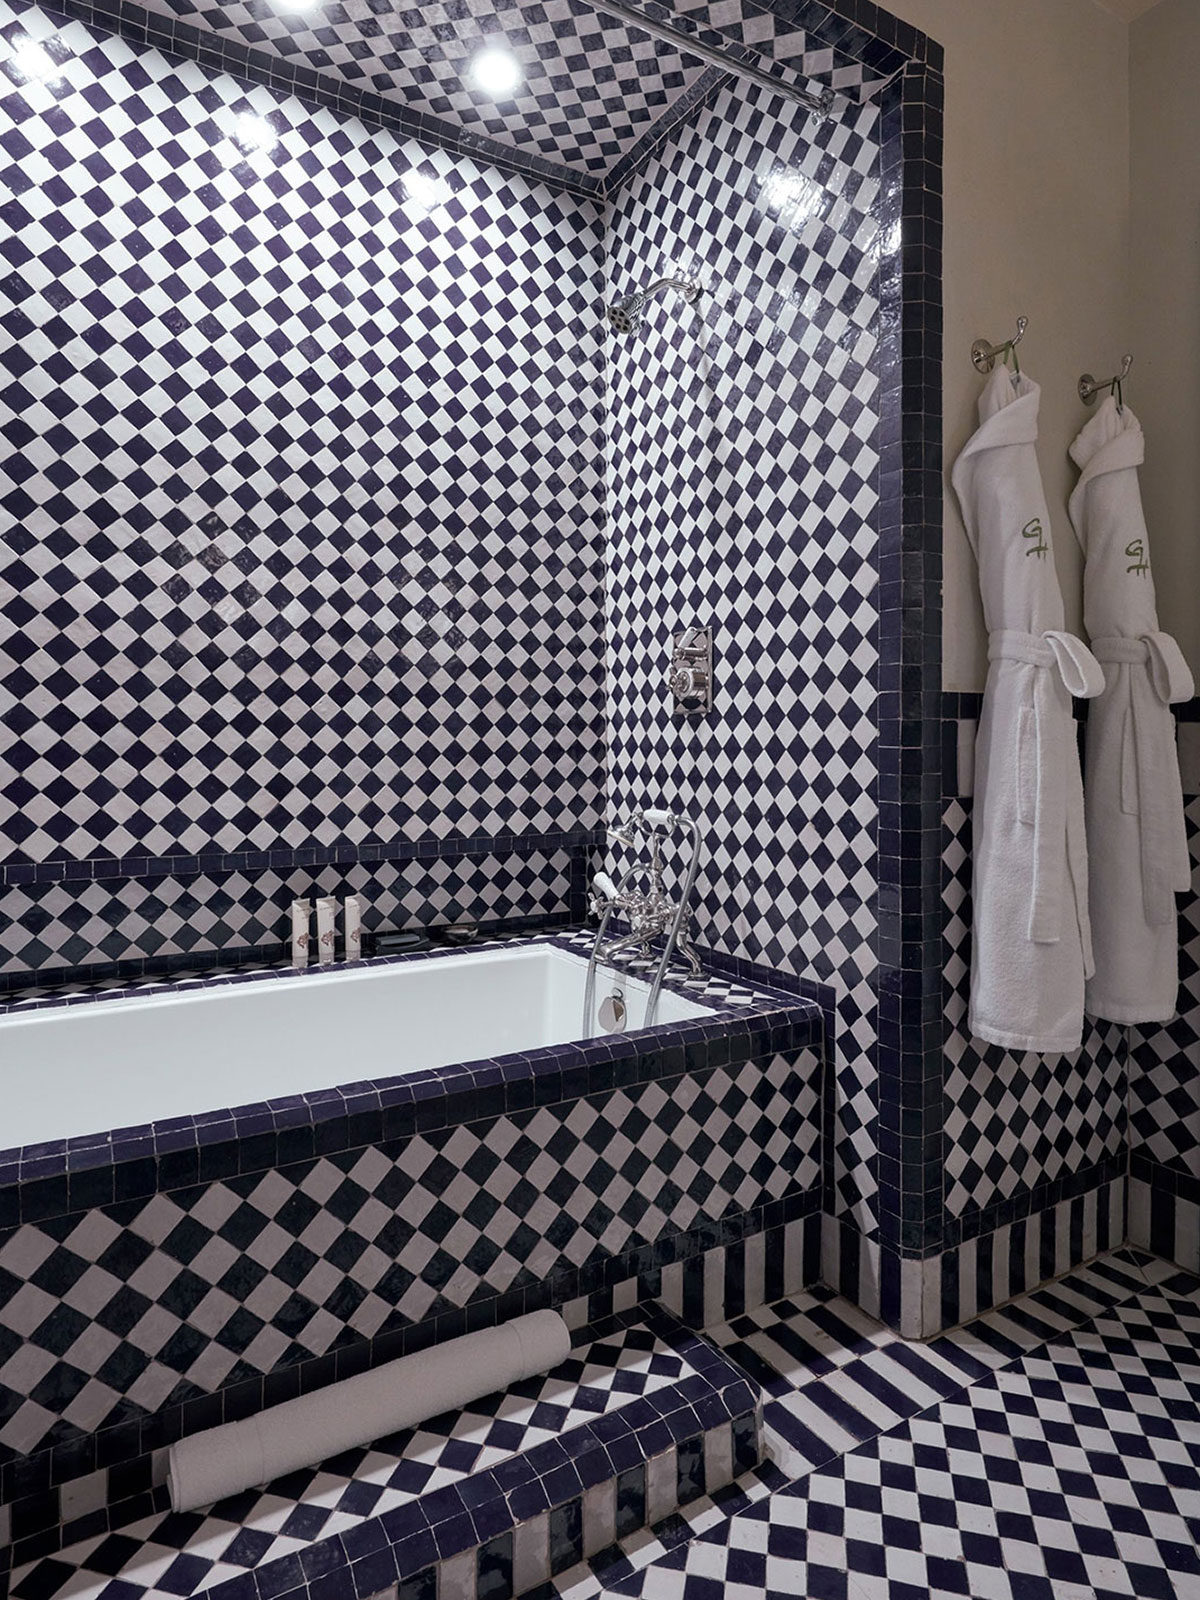 The Greenwich Hotel - Courtyard Queen Room with Soaking Tub - Blue and White Tile bathroom